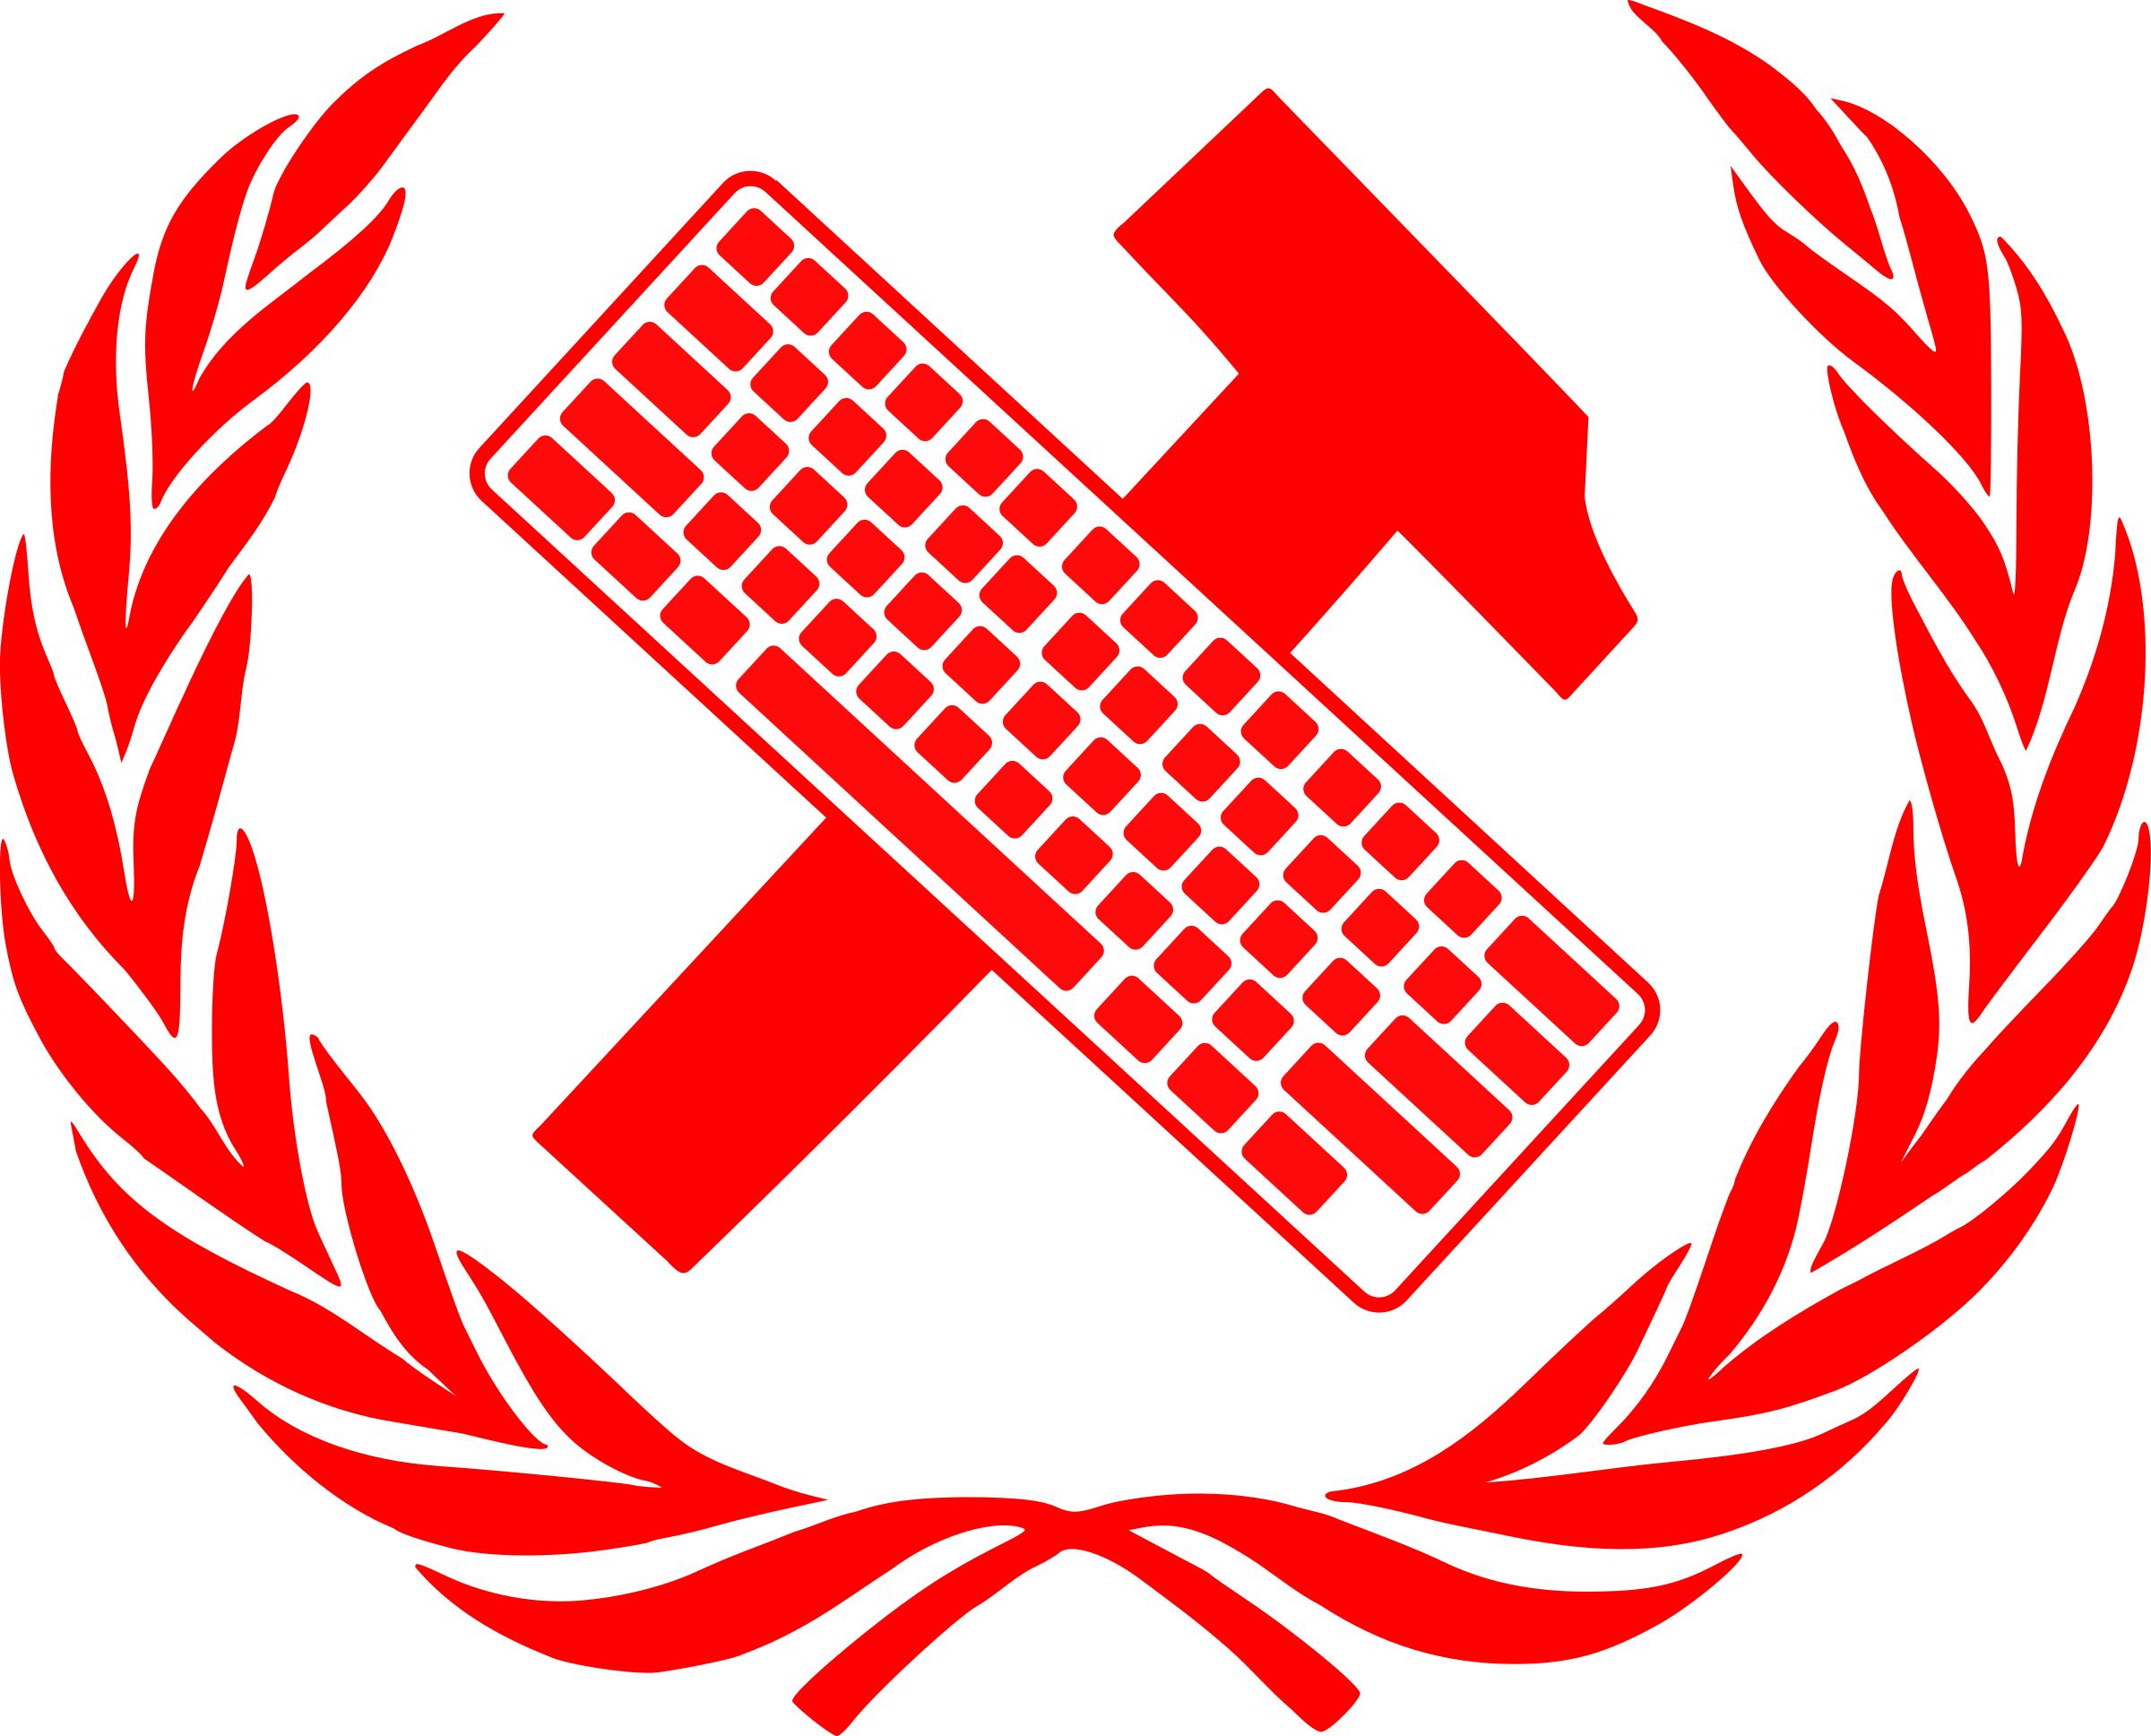 workers unite - hammer and keyboard in laurel wreath PNG icons